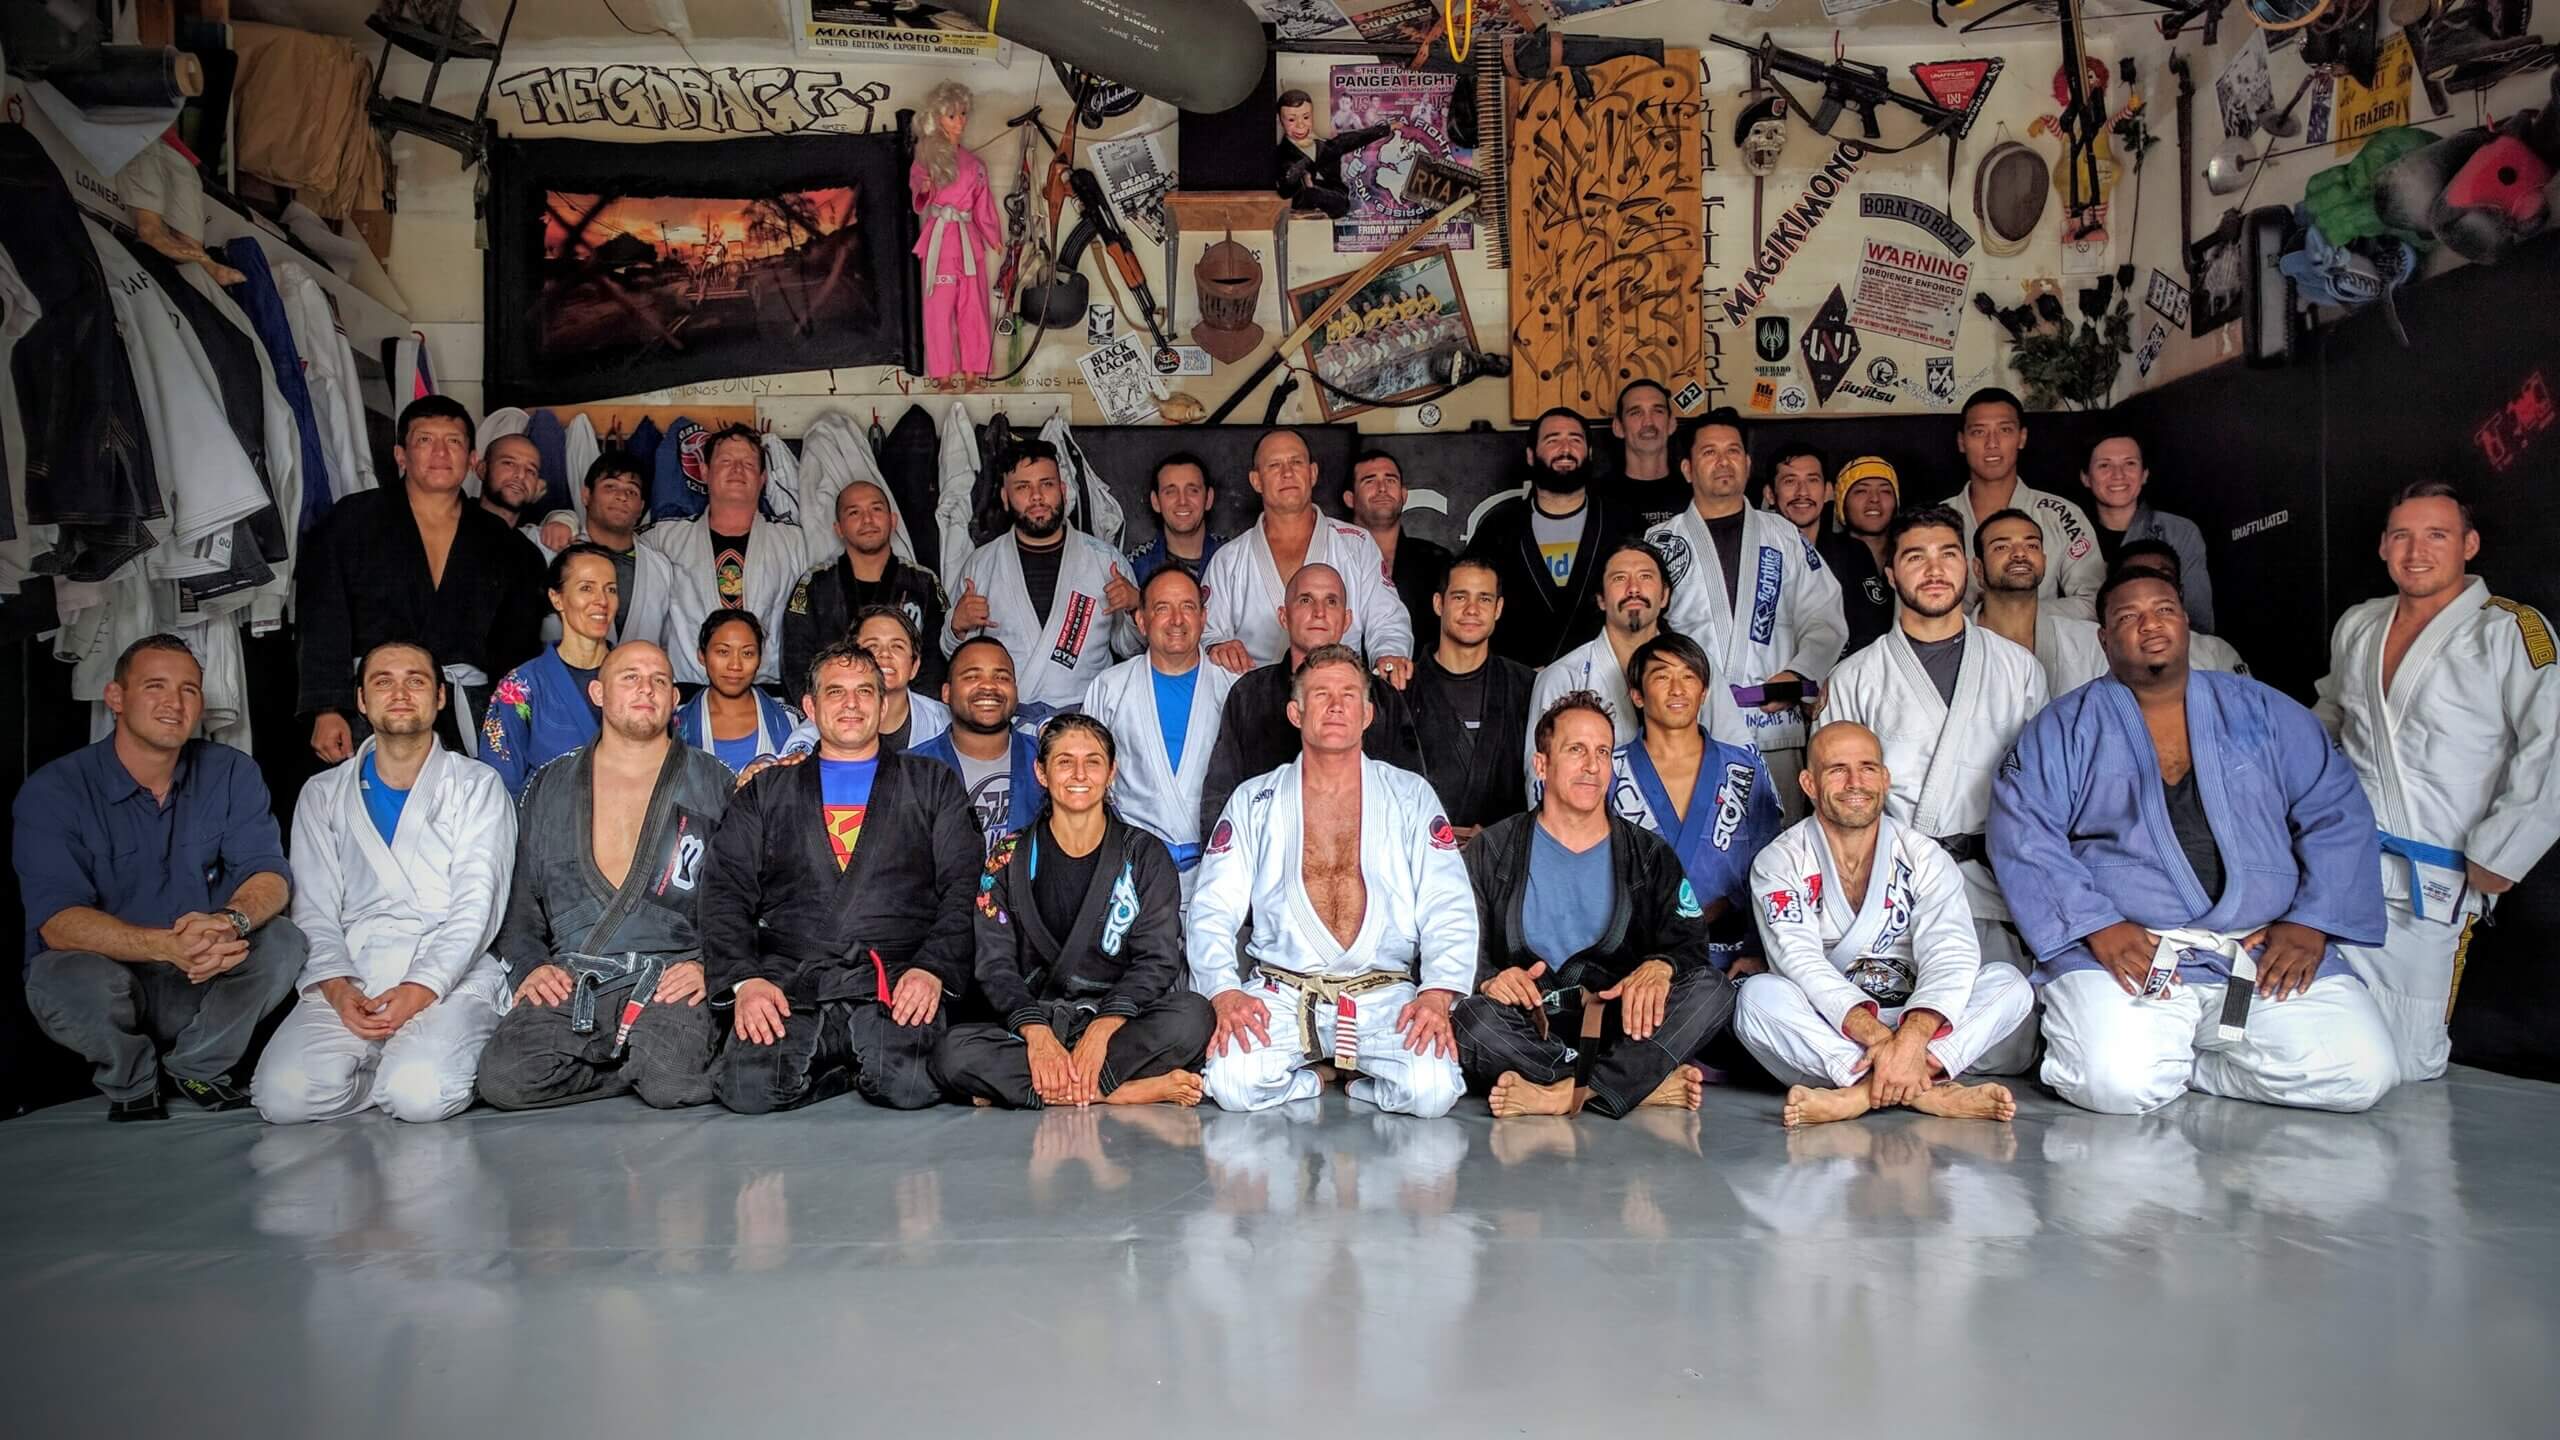 Group picture after open mat training at the Garage.